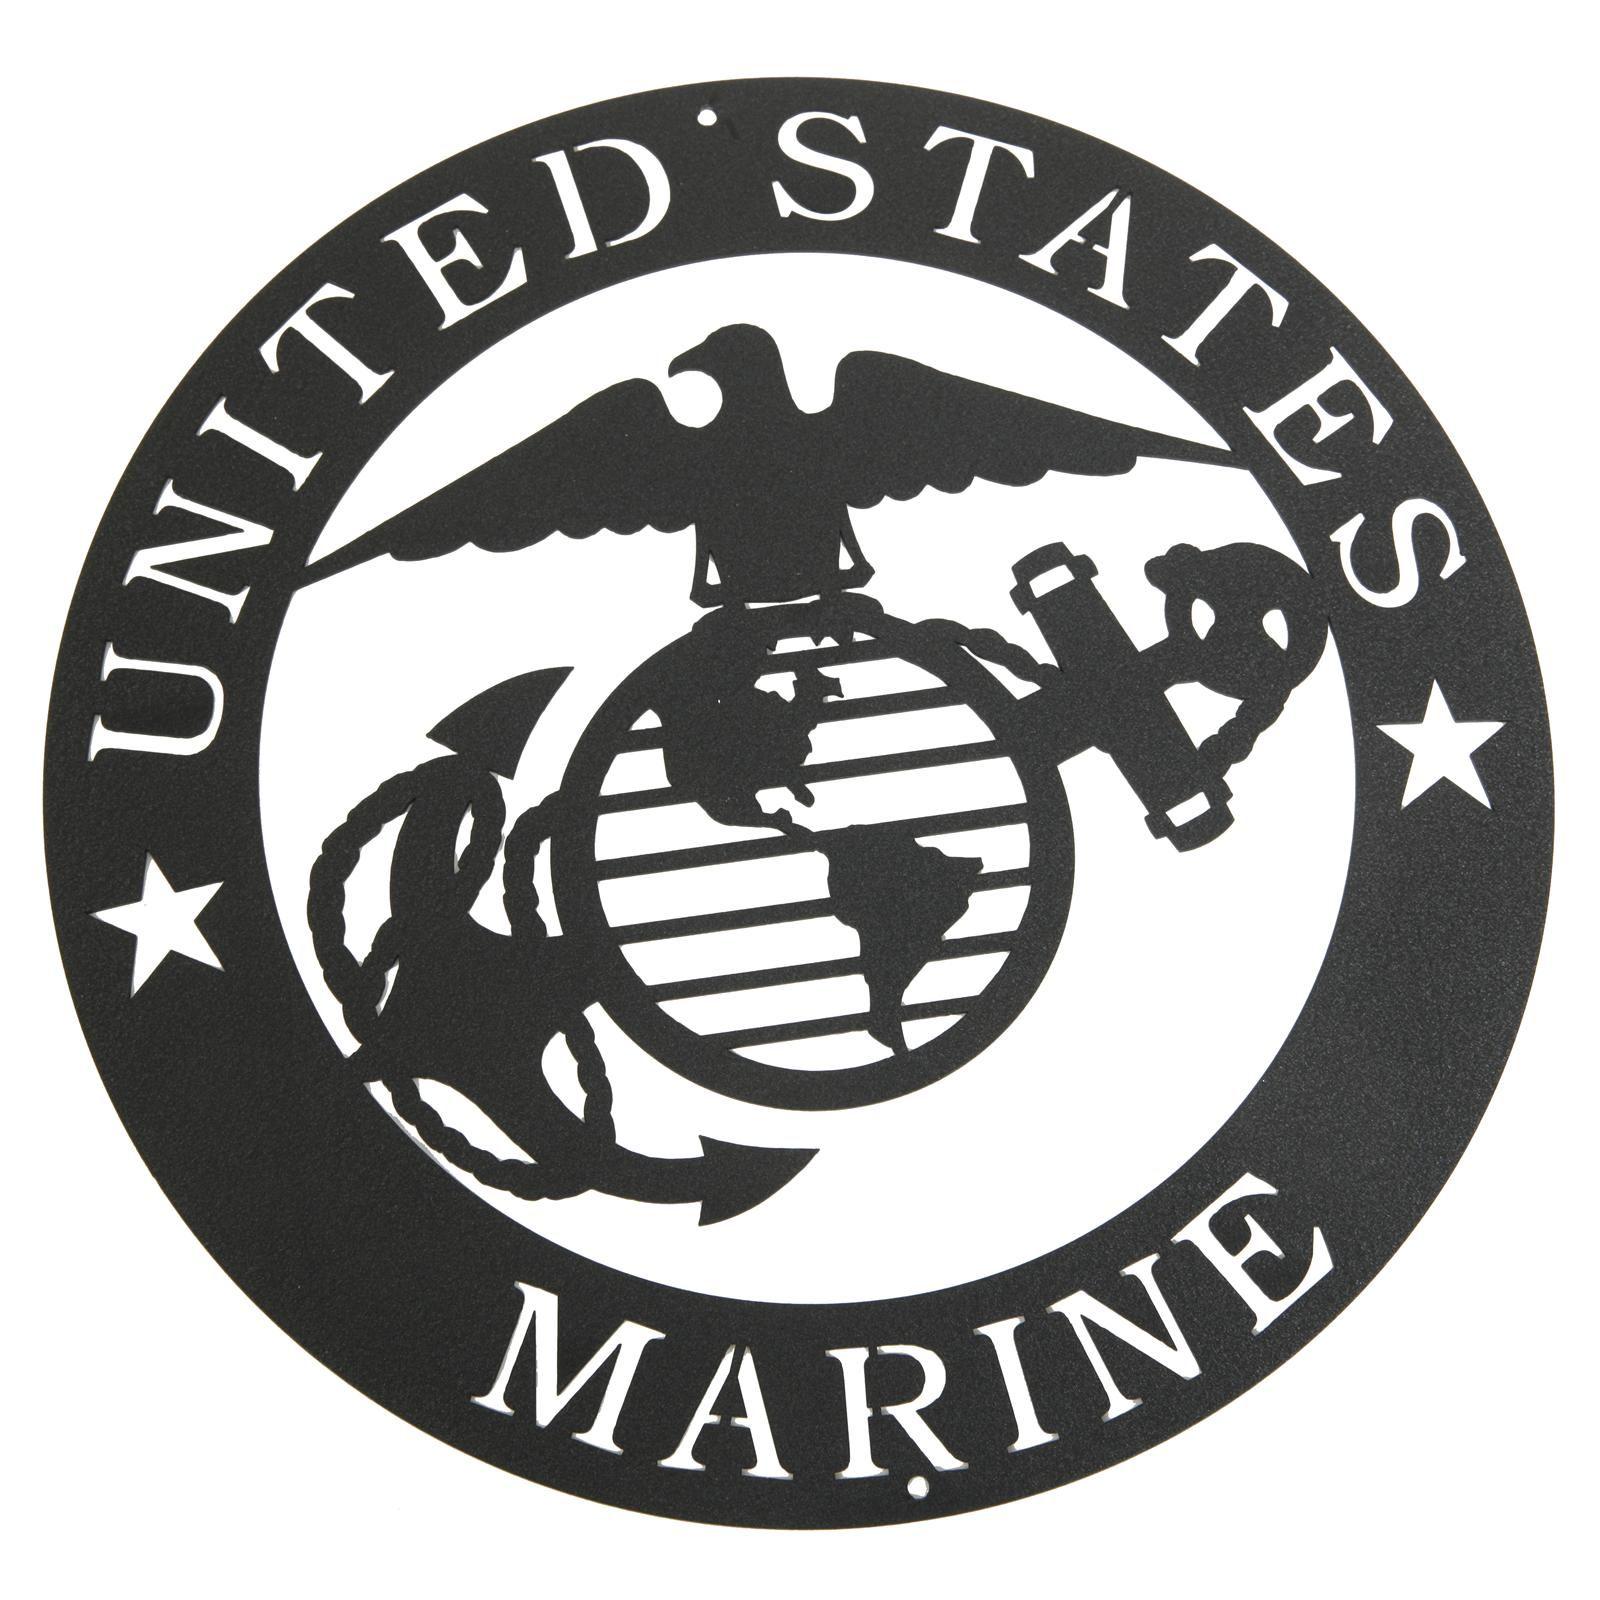 US Marines Logo - Marines Corps Emblem Metal Silhouette 3025 Shipping on Orders